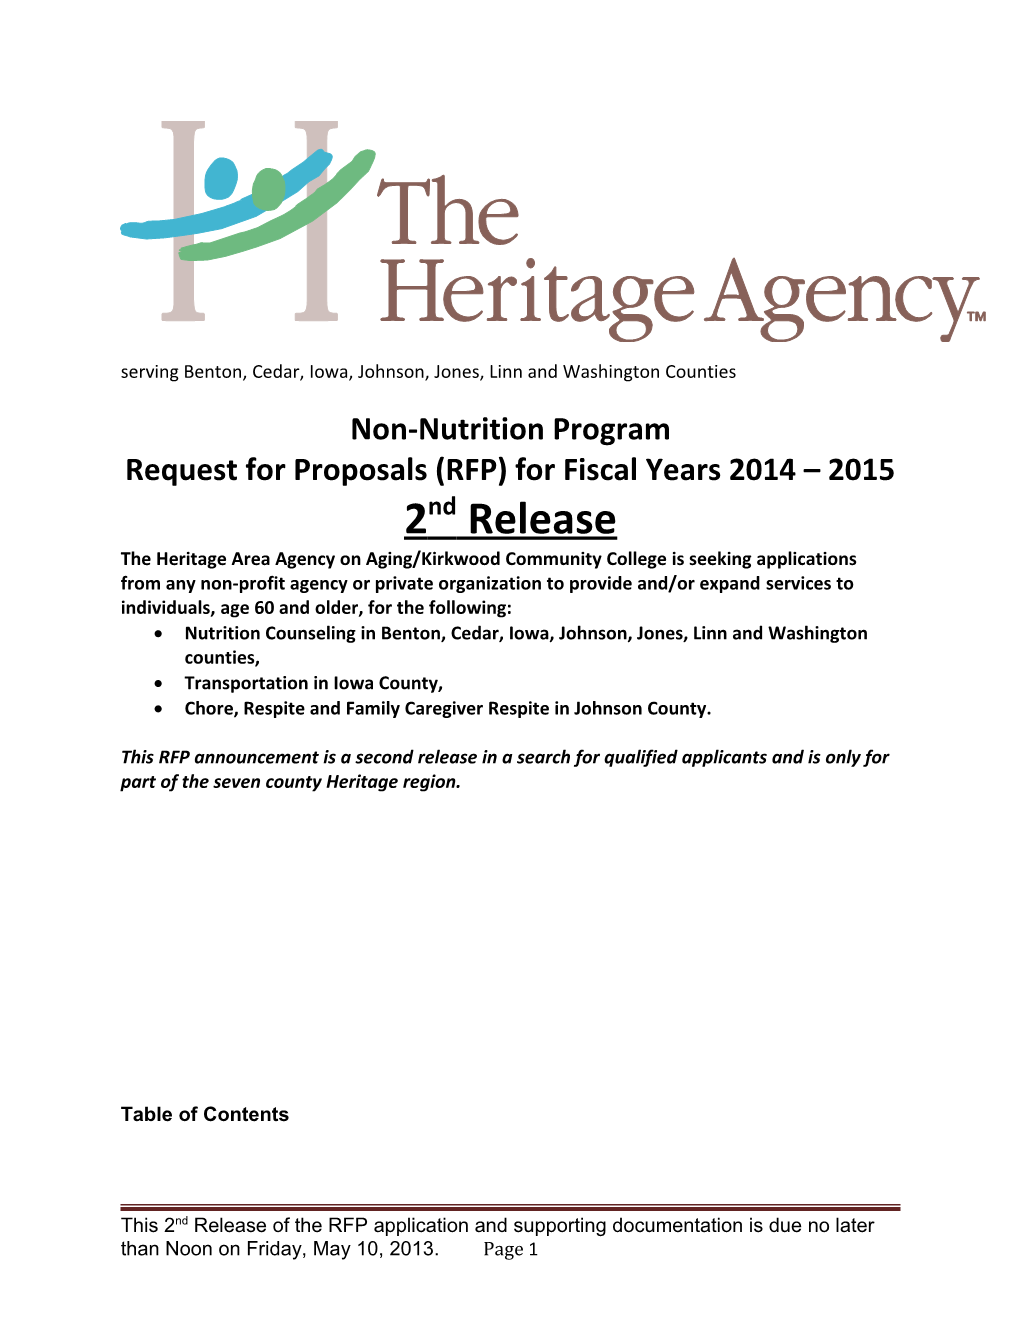 Request for Proposals (RFP) for Fiscal Years 2014 2015